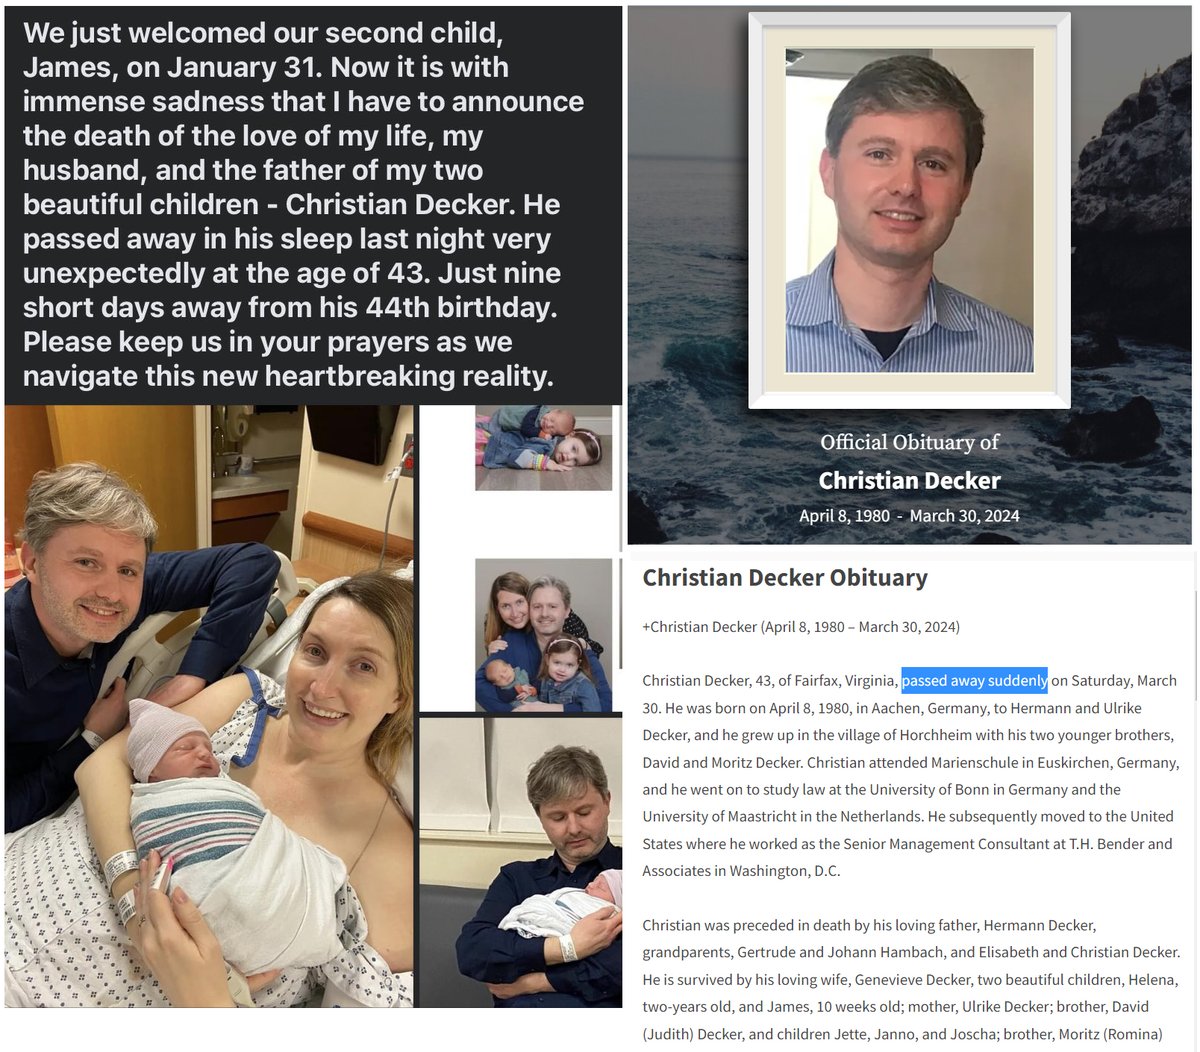 Fairfax, VA - 43 year old lawyer Christian Decker just had a new baby when he died suddenly in his sleep on March 30, 2024

Any sudden death in sleep in the COVID-19 mRNA Vaccine era should be considered mRNA Induced sudden cardiac death until proven otherwise

#DiedSuddenly